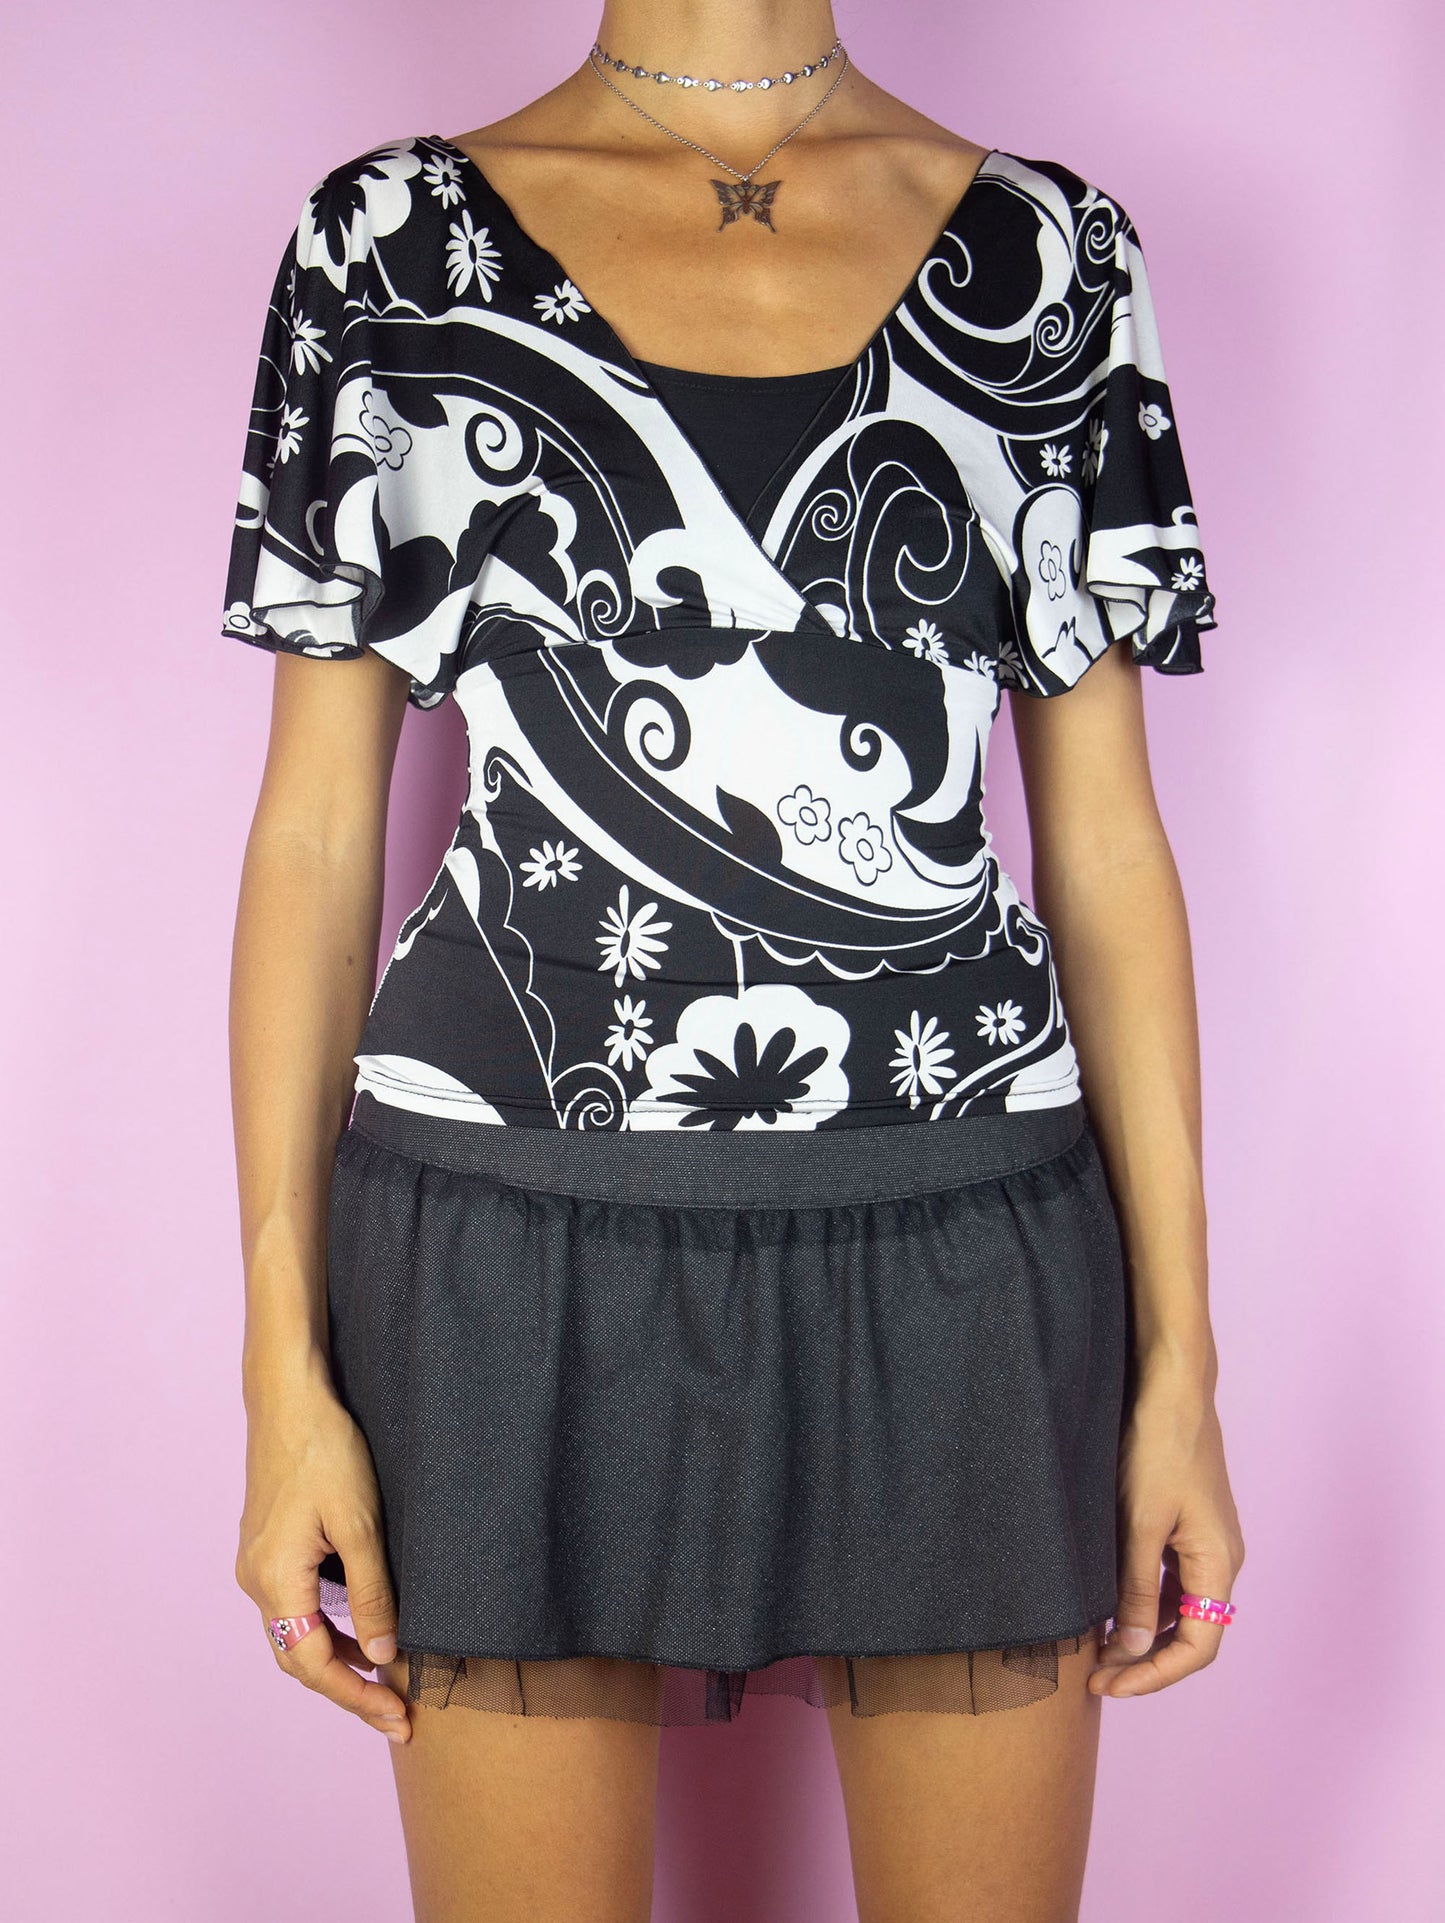 The Vintage Y2K Black Floral Wrap Top is a black and white abstract floral print wrap short sleeve t-shirt. Super cute cyber summer blouse circa 2000's.